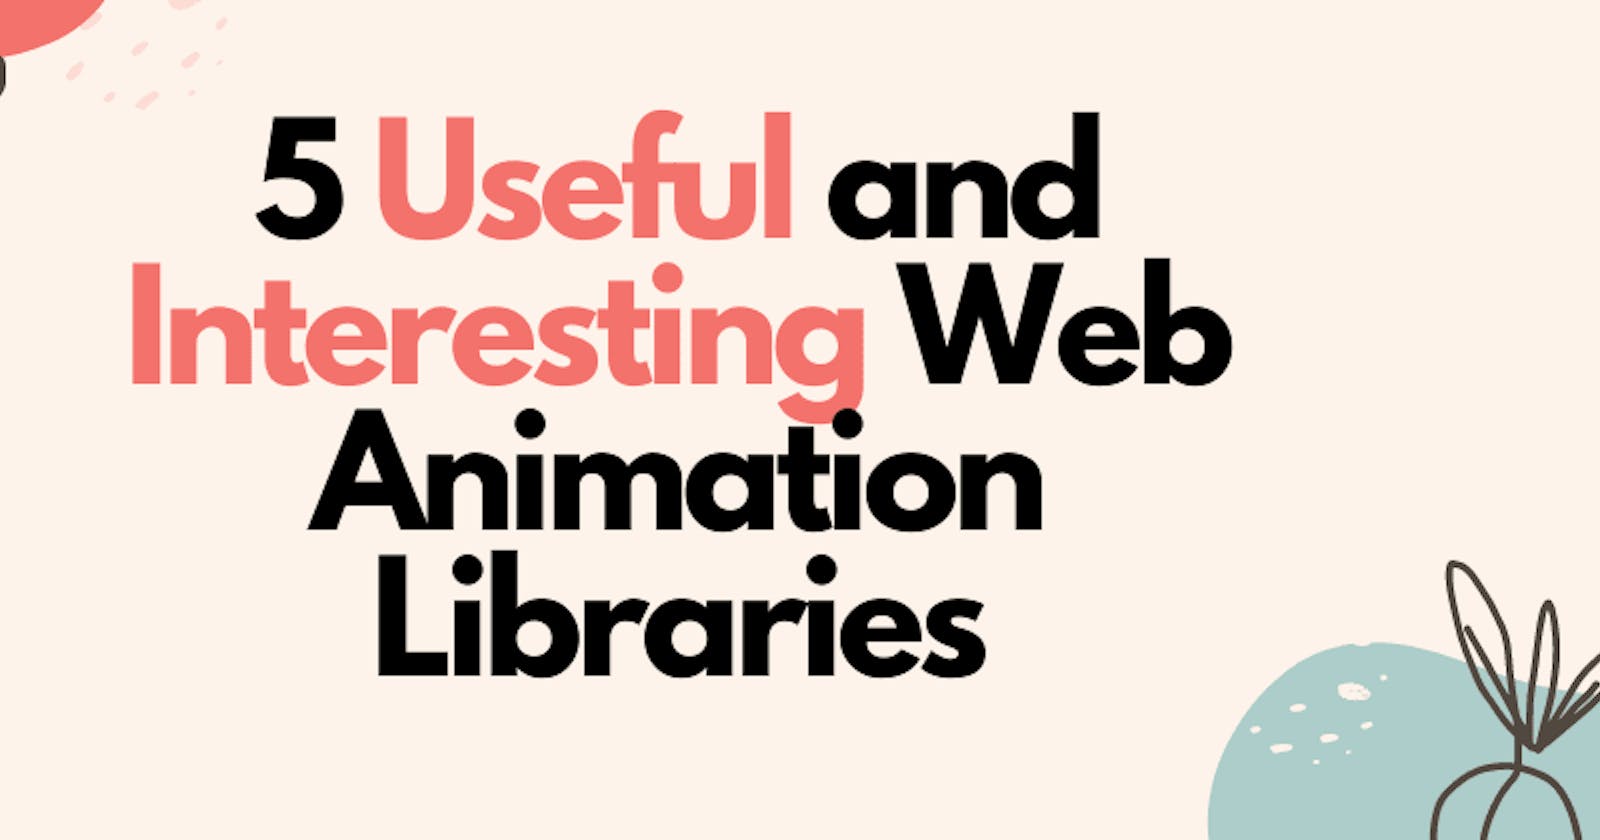 5 Useful and Interesting Web Animation Libraries